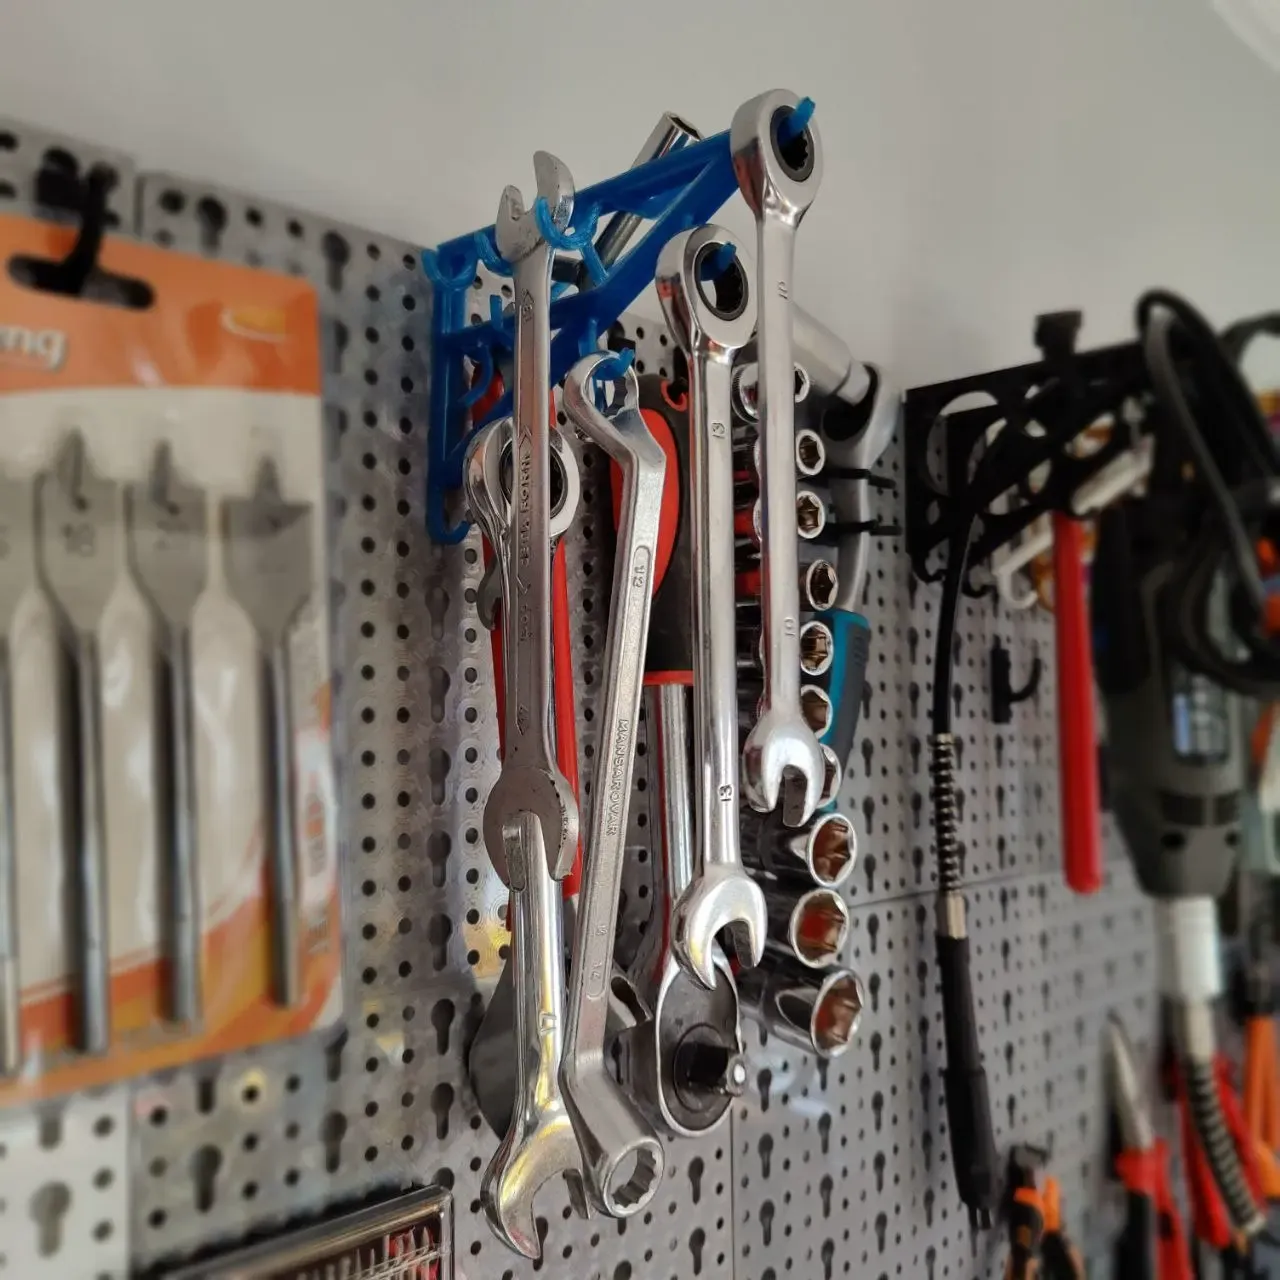 PEGBOARD (TOOL PANEL) KIT WITH A VARIETY OF TOOLS